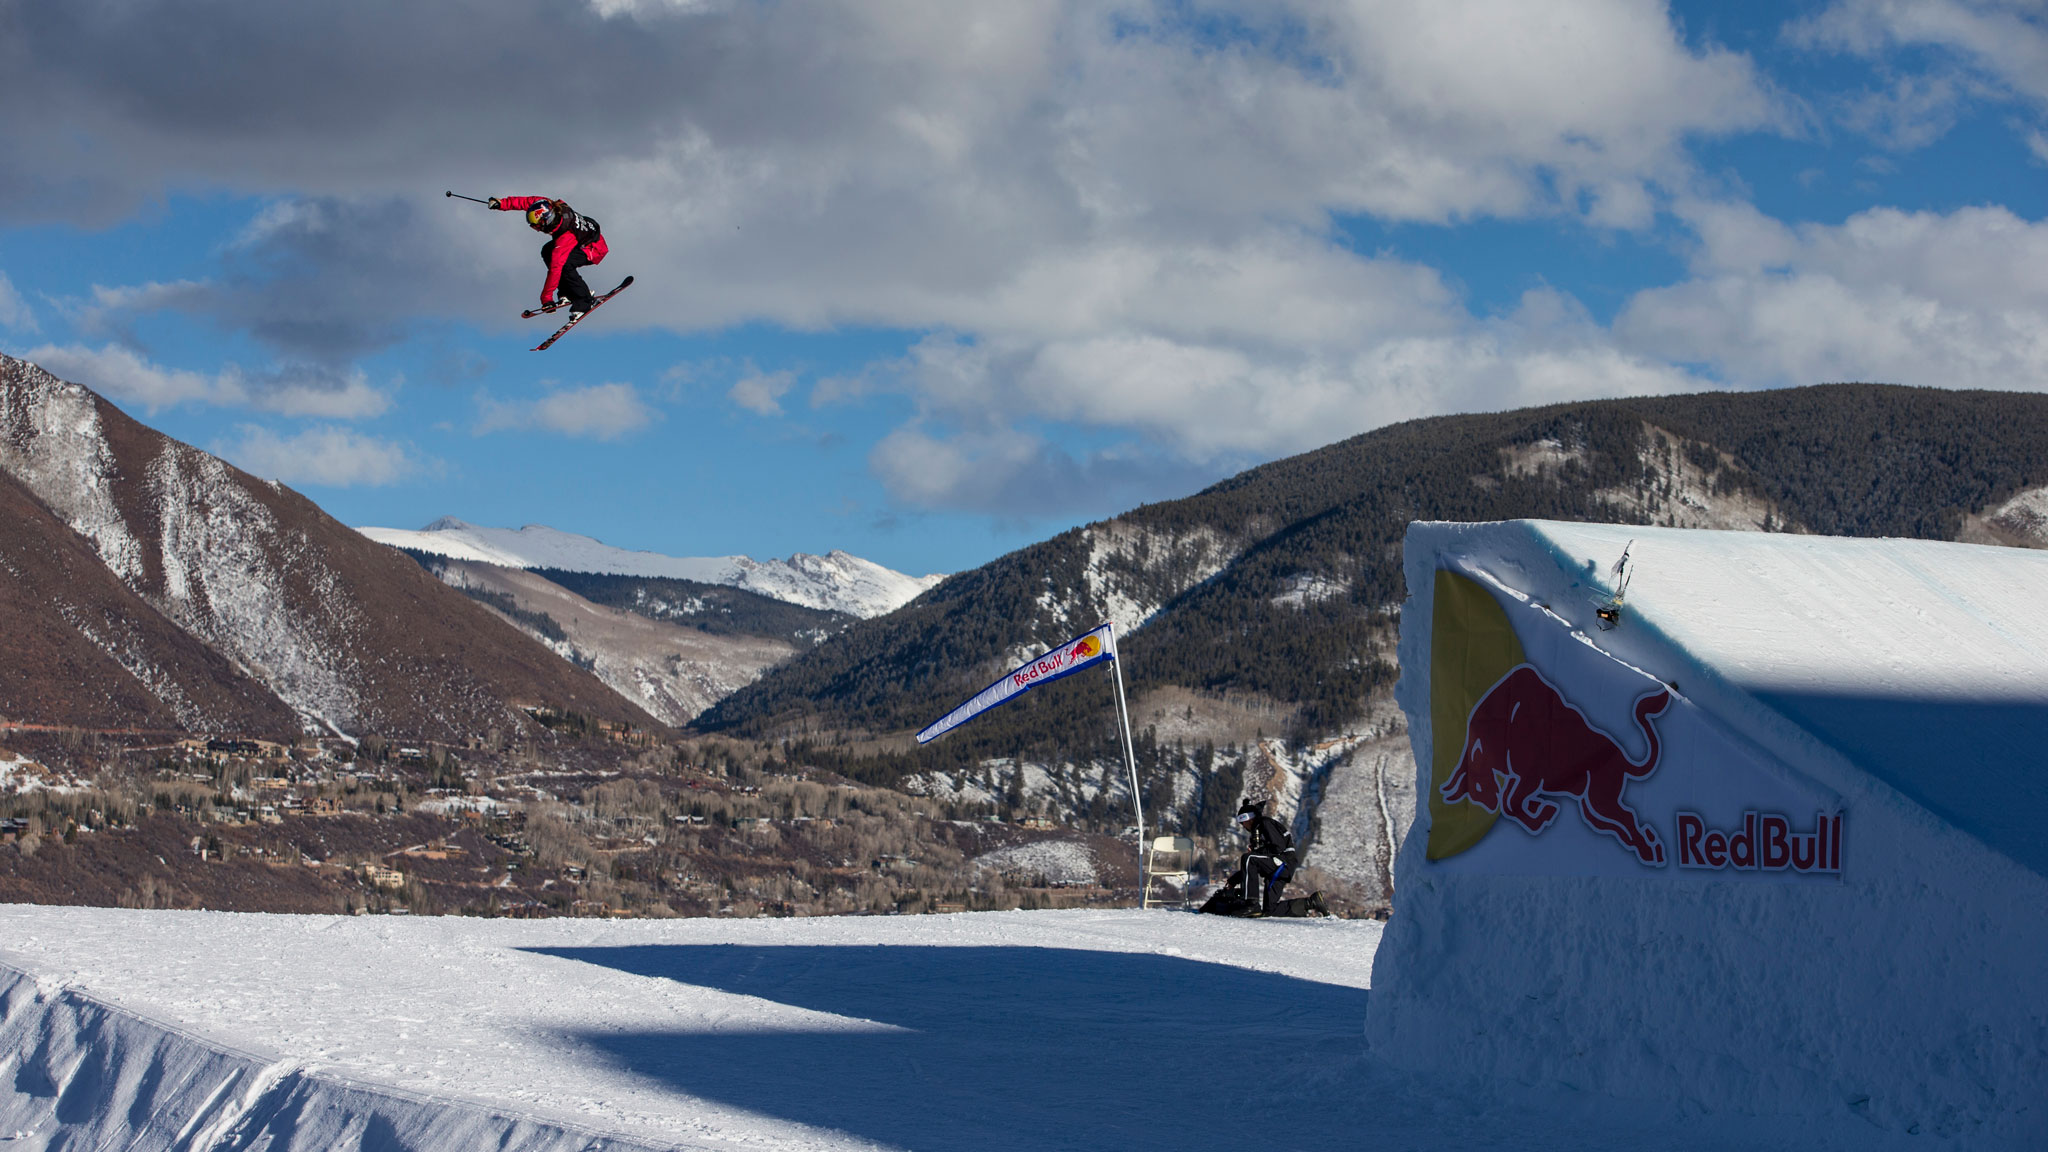 Kaya Turski has three gold medals from X Games Aspen, and last March, she earned a record four-peat at X Games Tignes.